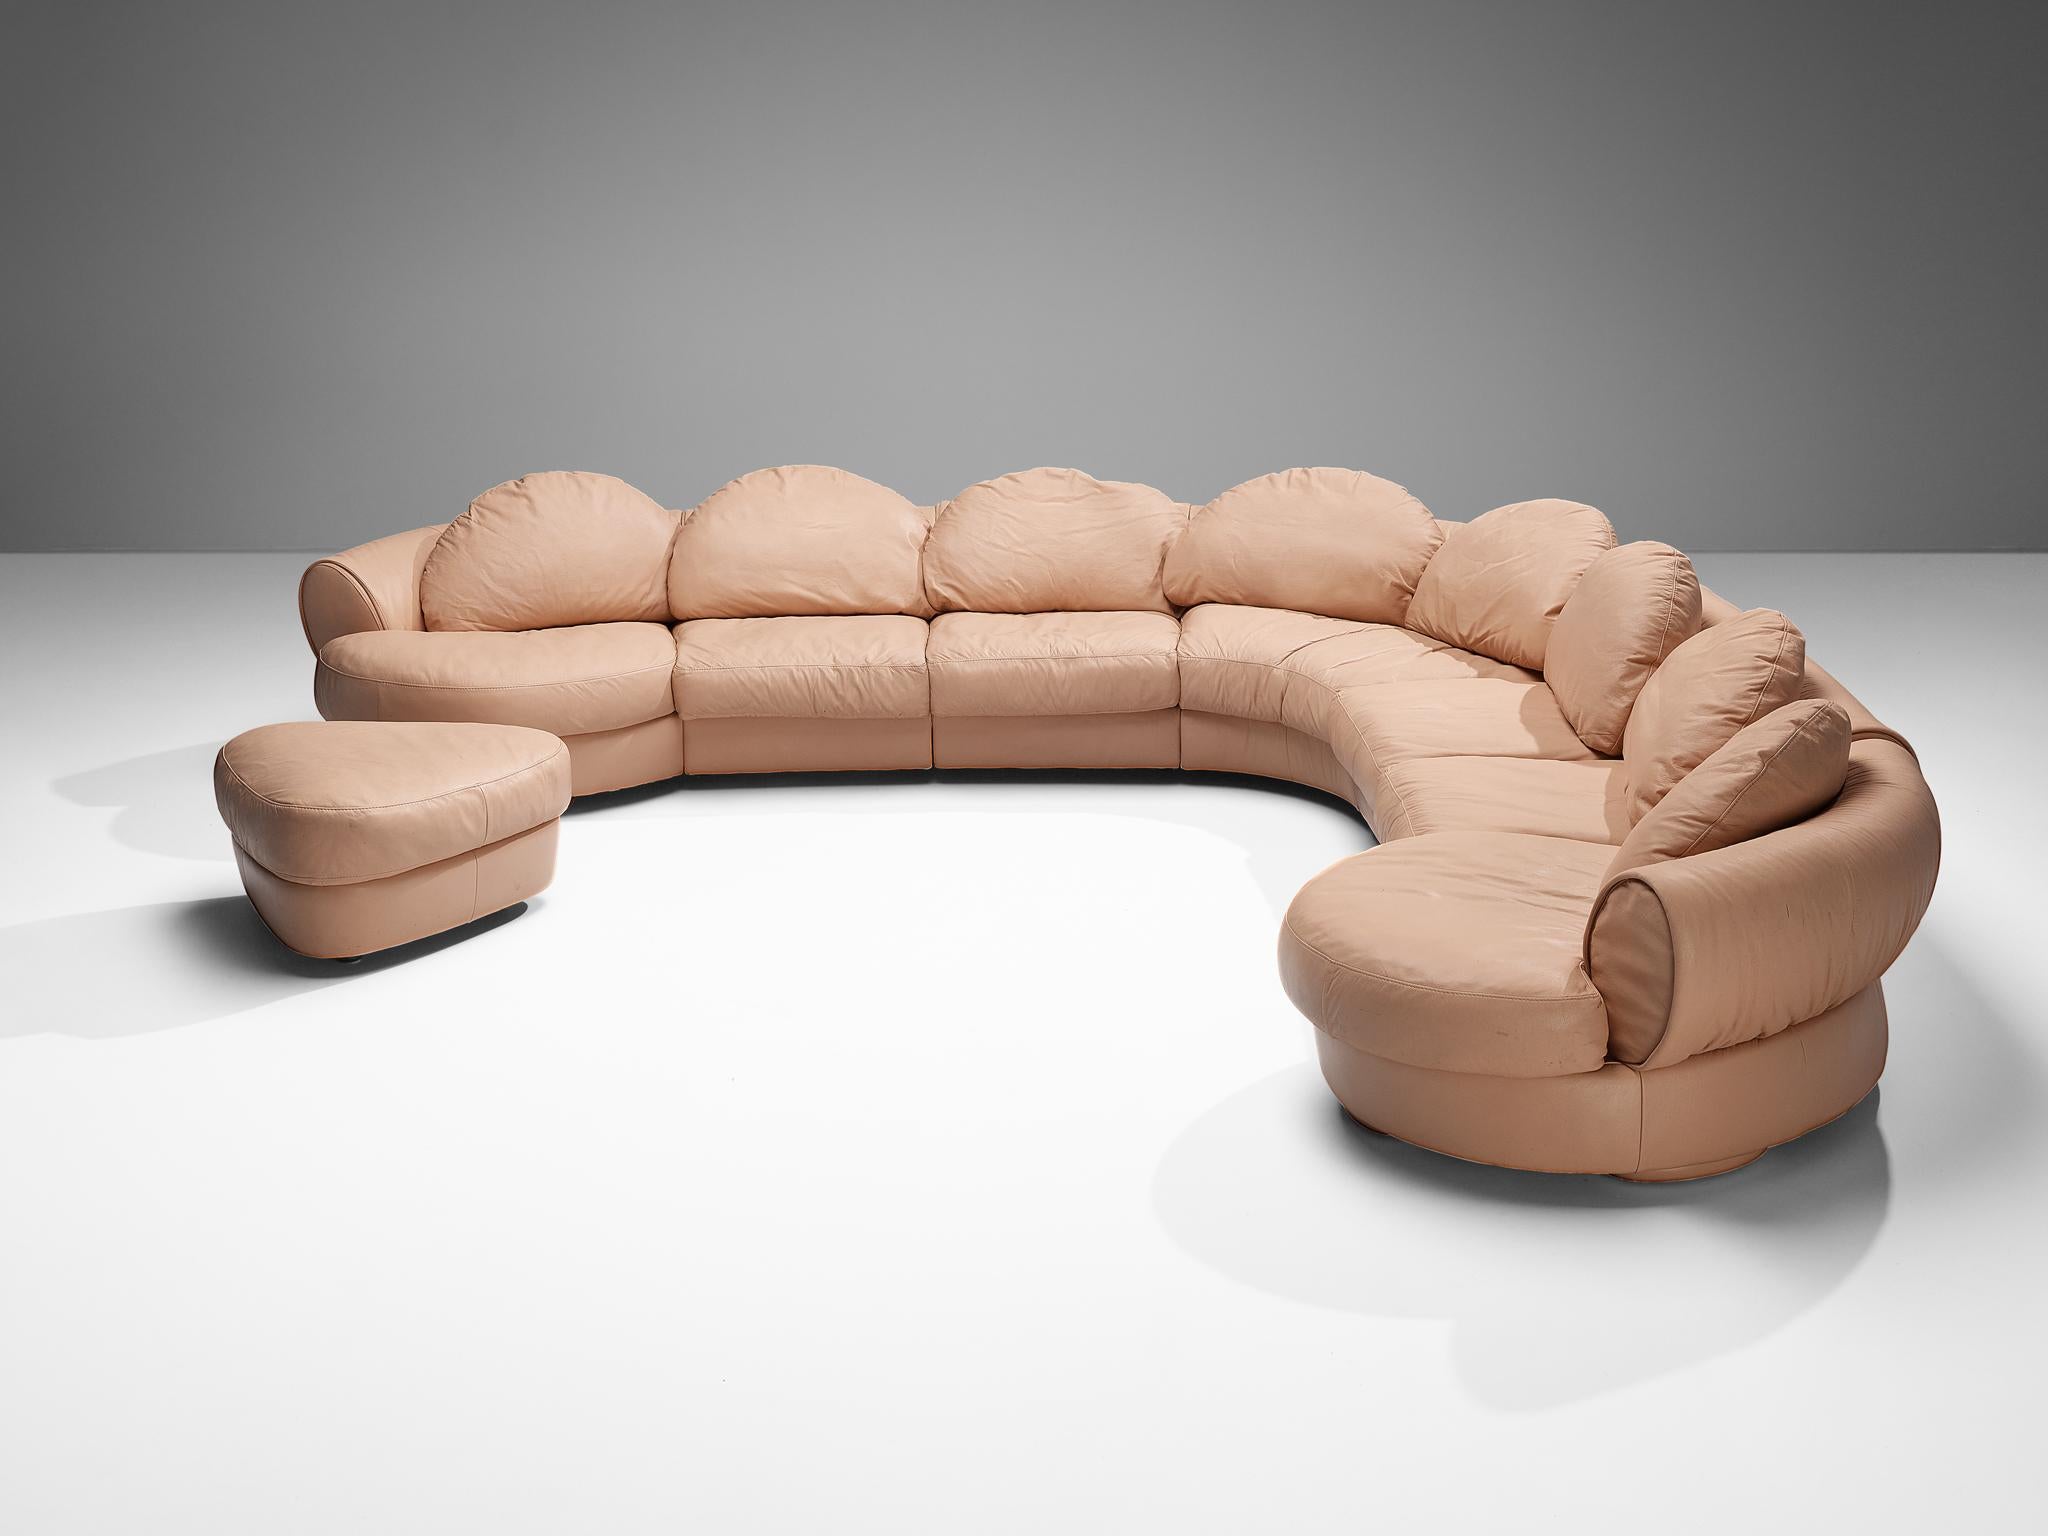 Wiener Werkstätte 'Attributed' Sectional Sofa in Pink Orange Leather  For Sale 5